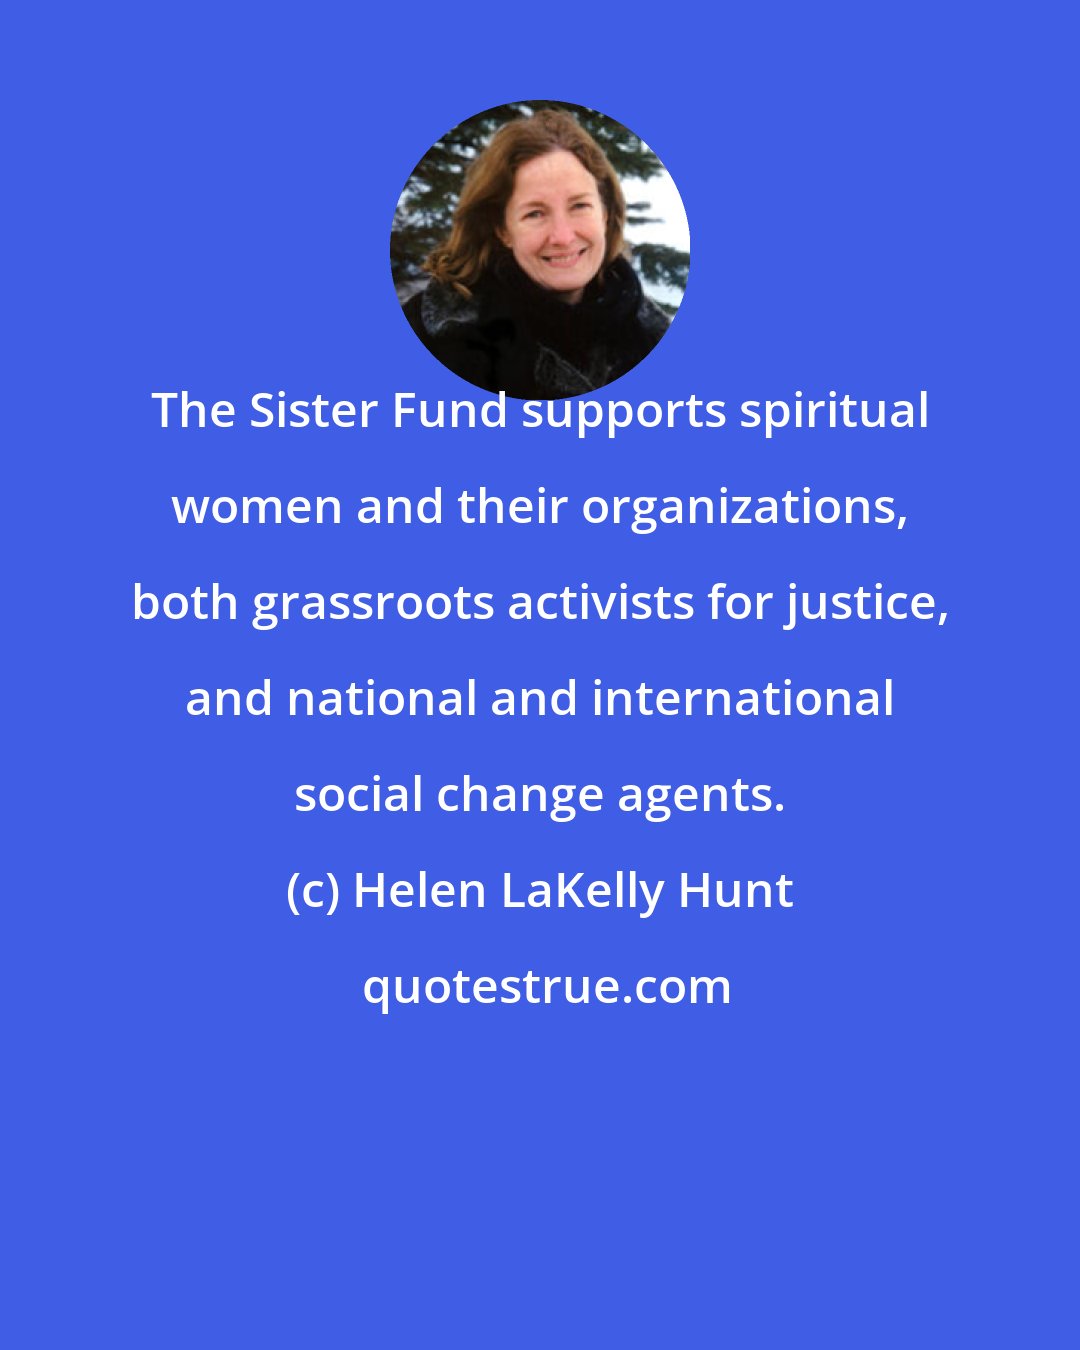 Helen LaKelly Hunt: The Sister Fund supports spiritual women and their organizations, both grassroots activists for justice, and national and international social change agents.